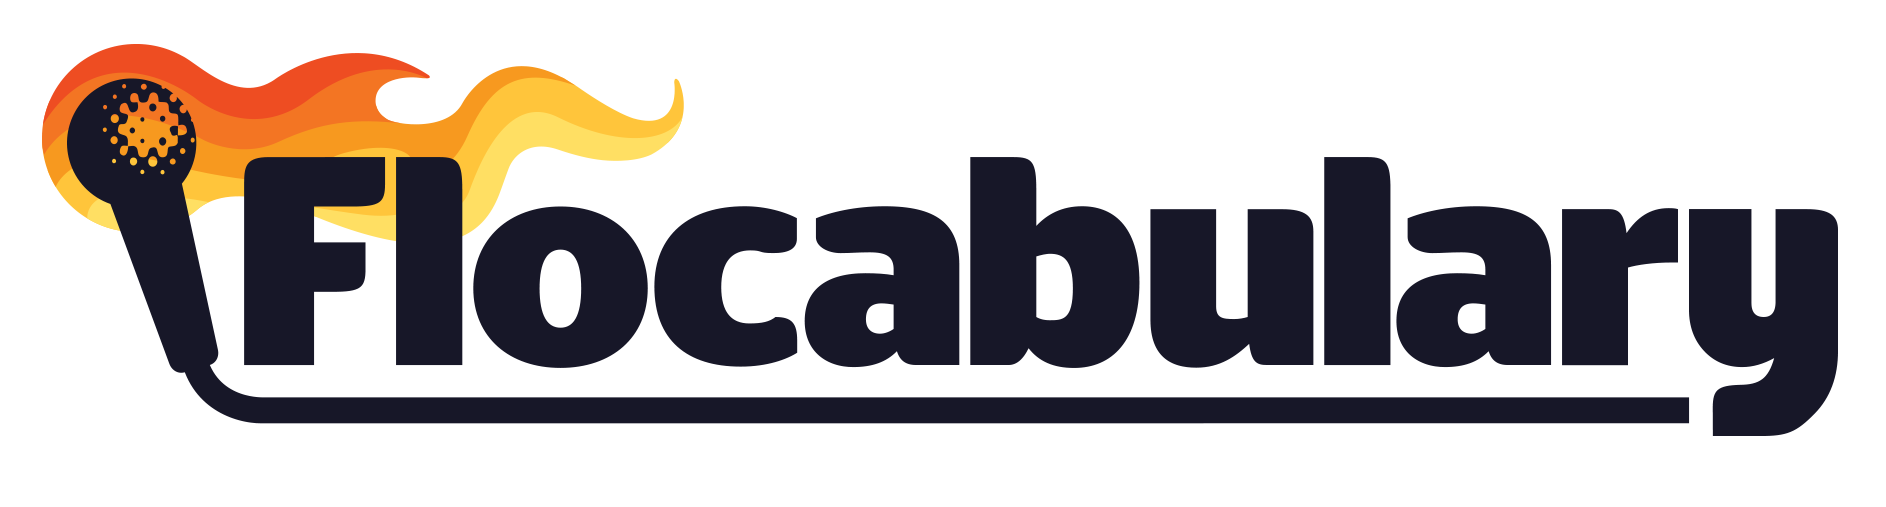 Flocabulary_Logo_post_2013.png